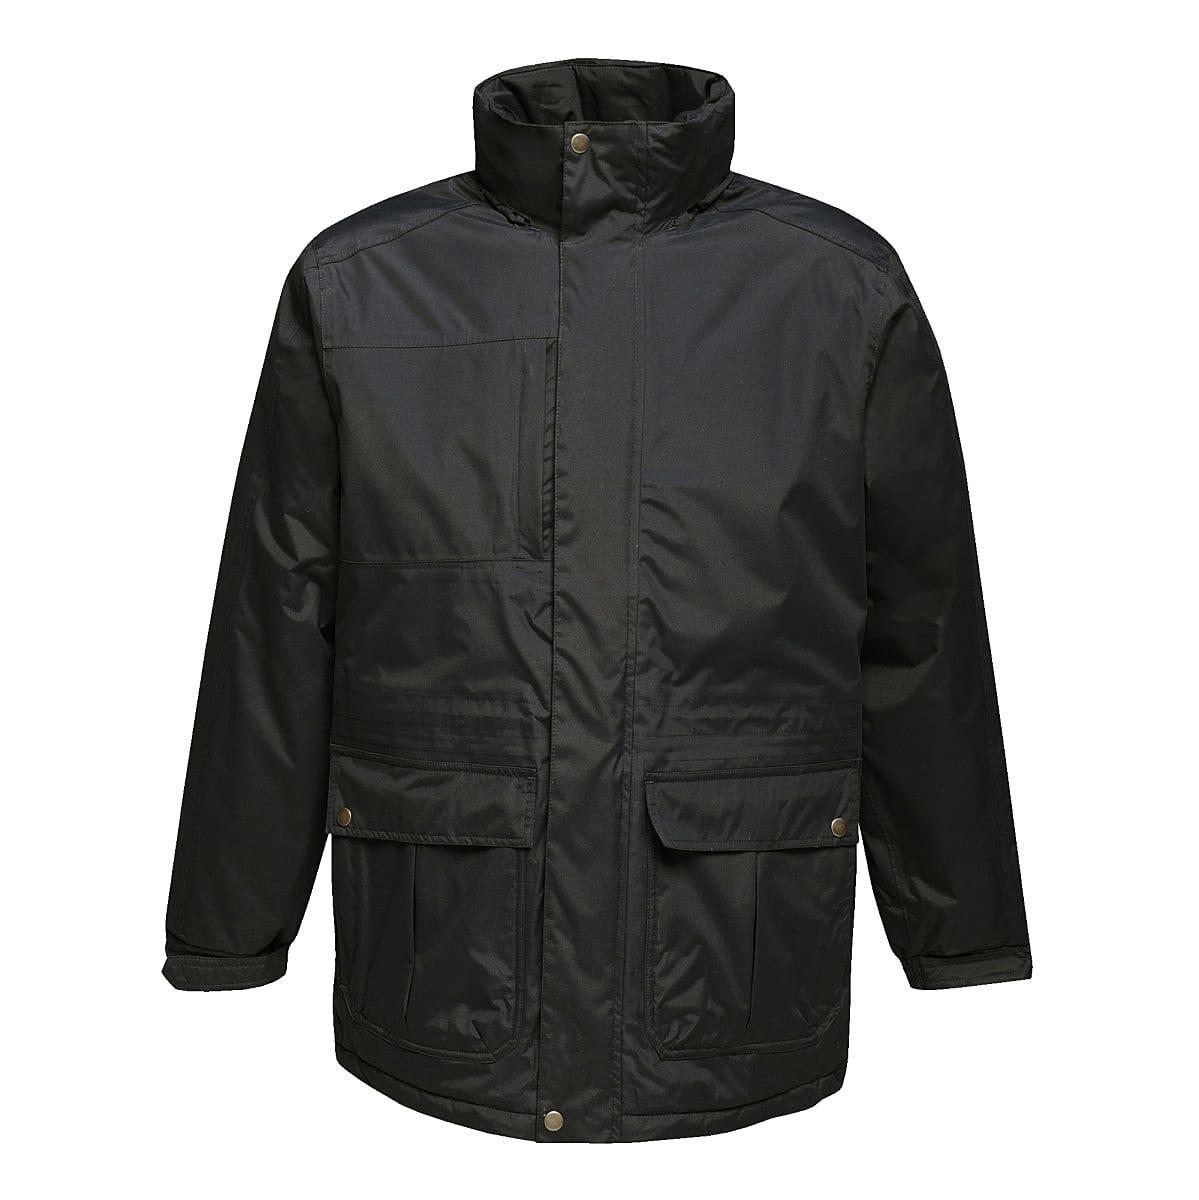 Regatta Mens Darby III Insulated Jacket in Black (Product Code: TRA203)